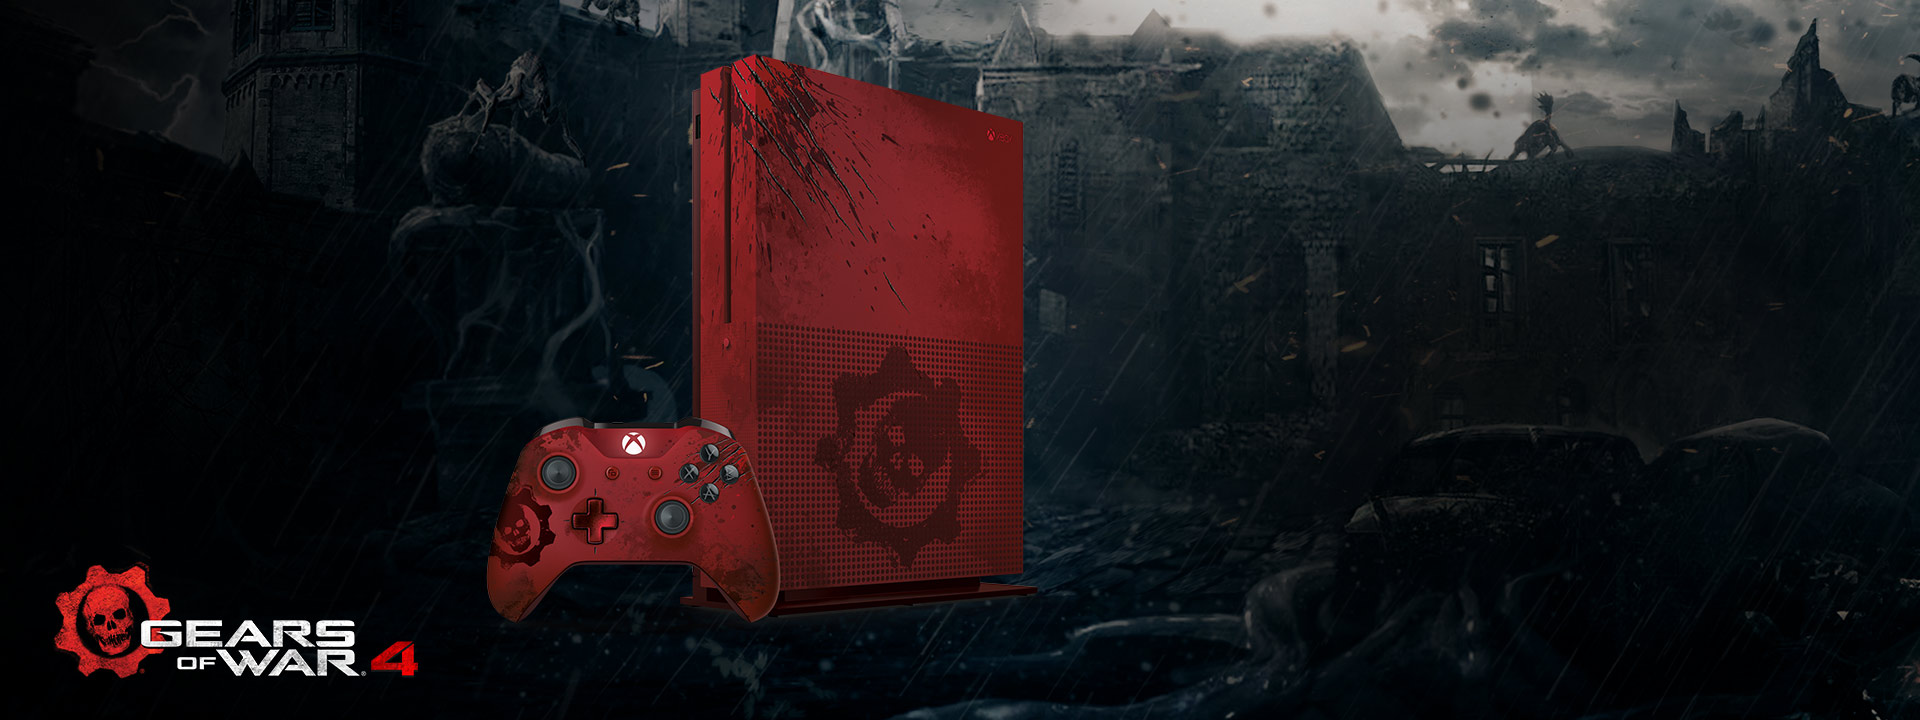 download xbox one s gears of war 4 limited edition for free